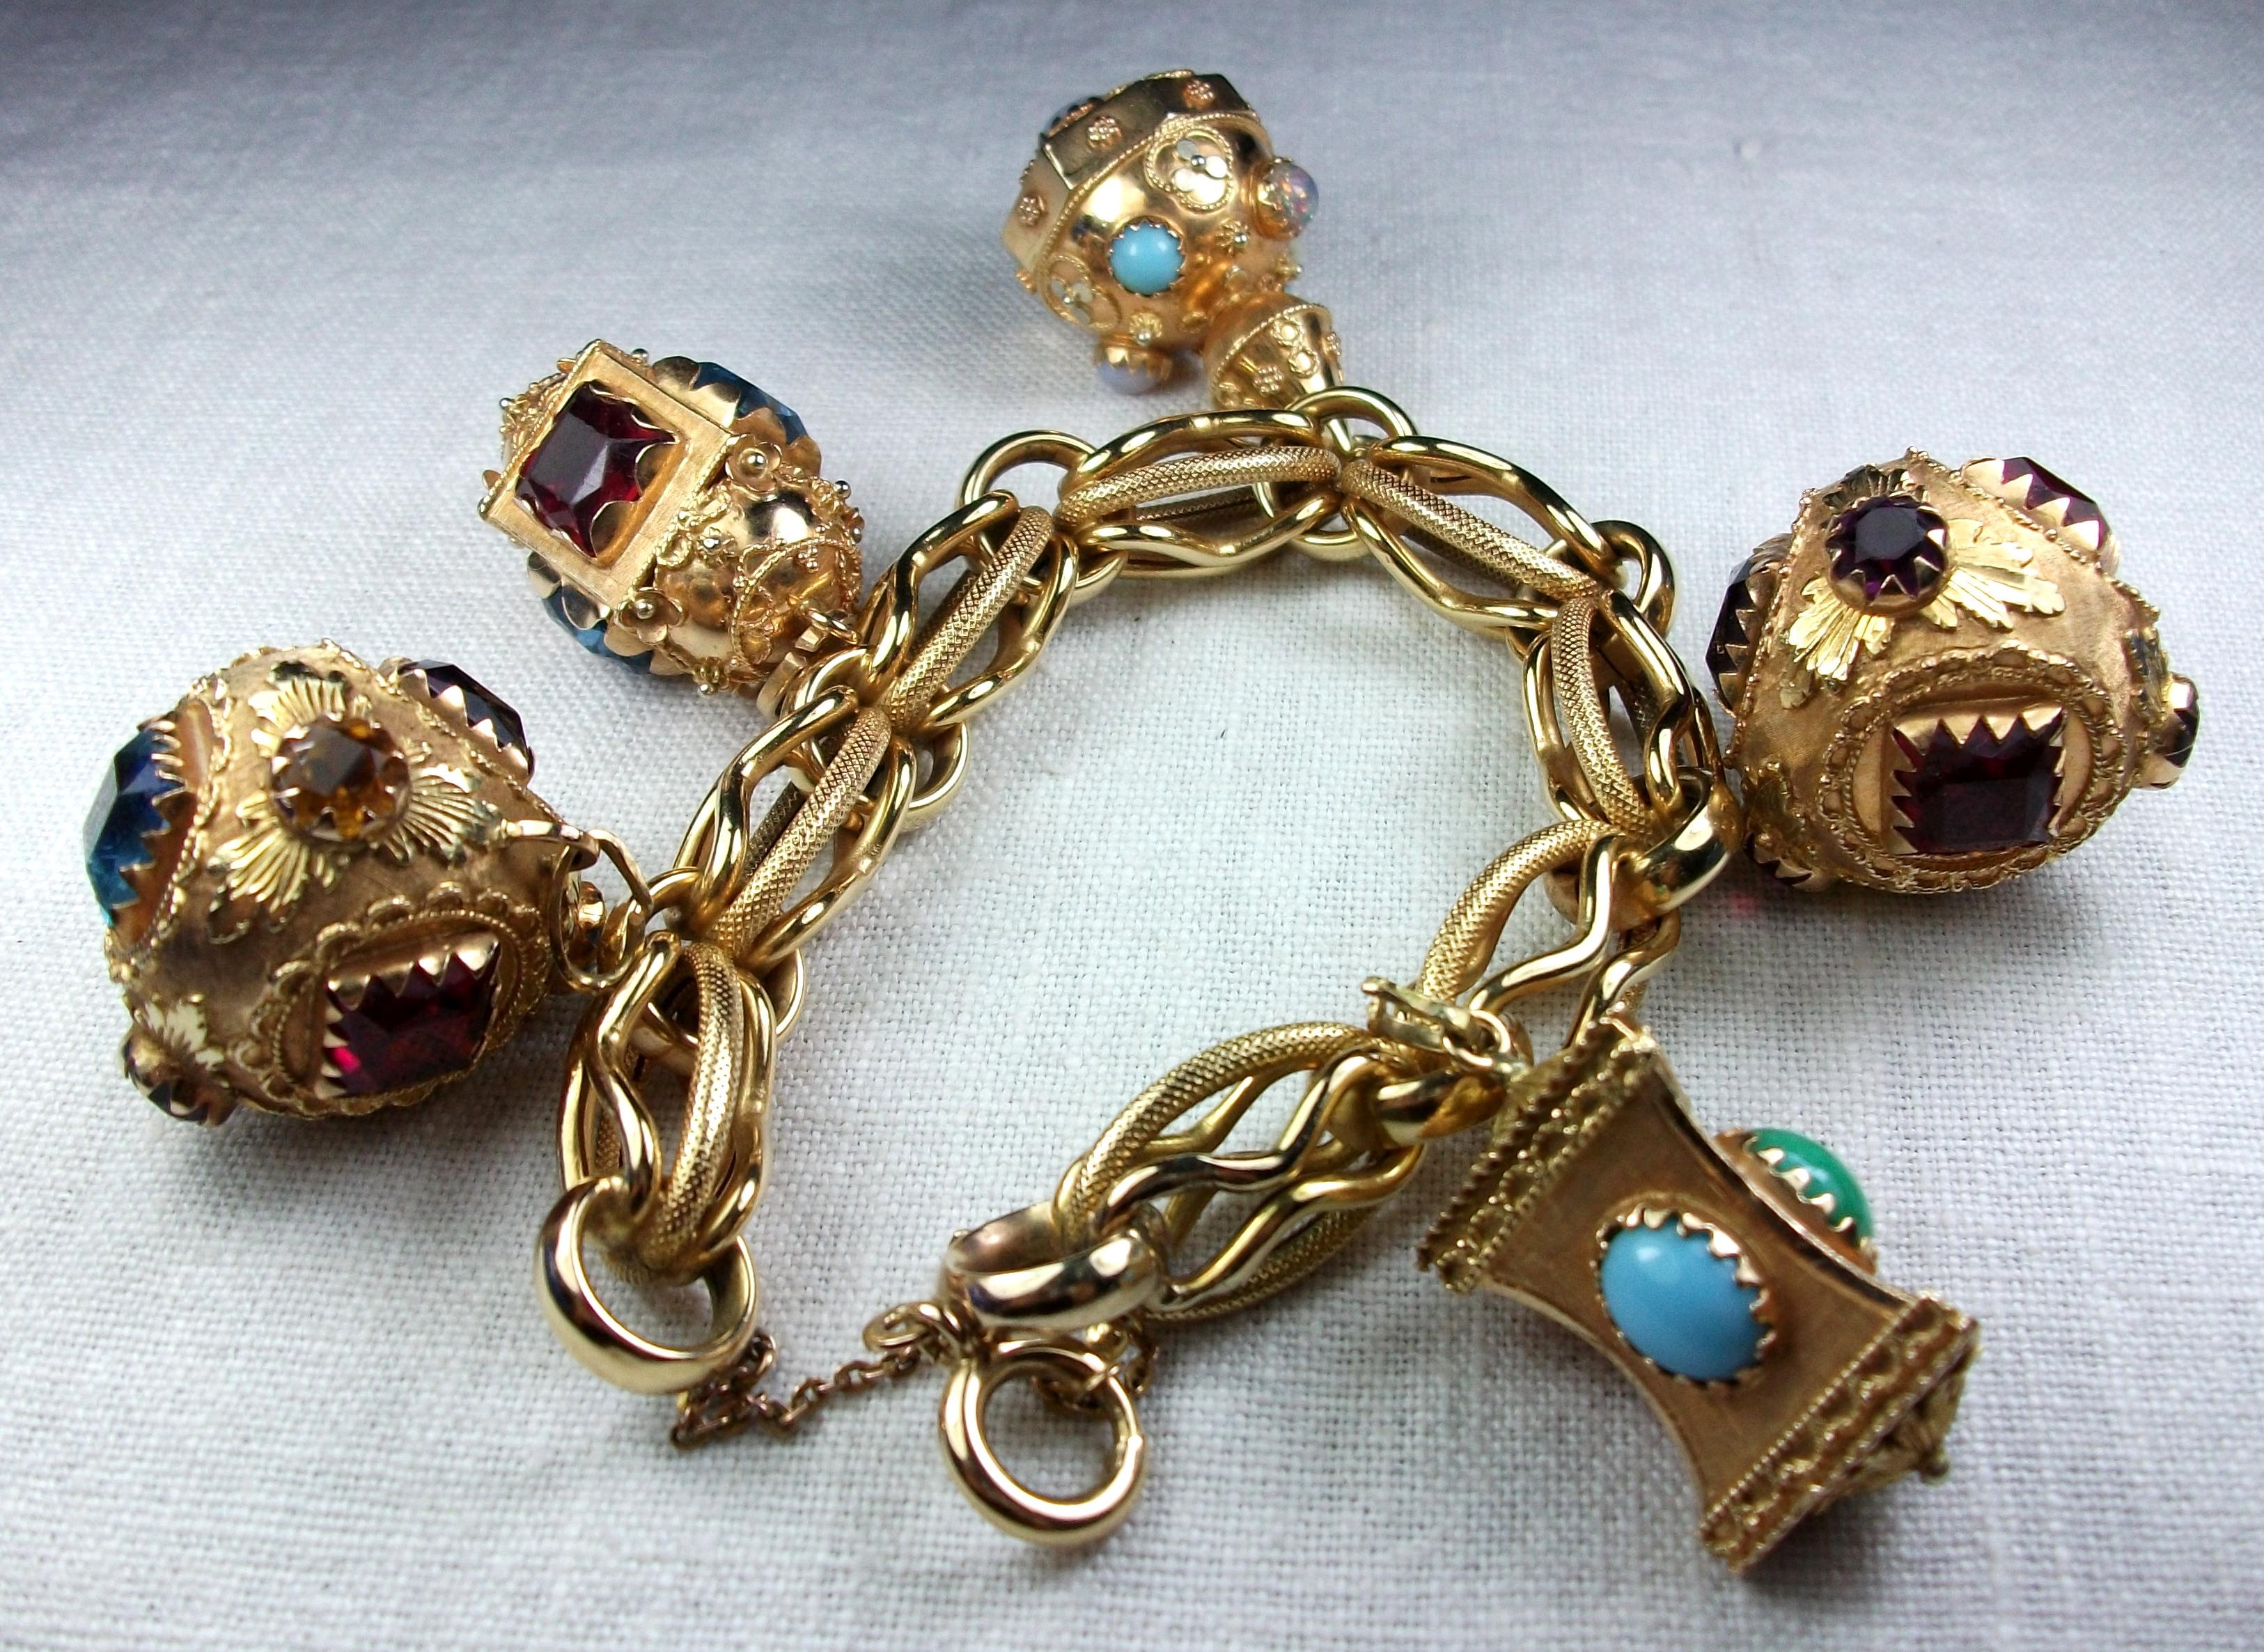 This is a more than wonderful 18k Etruscan style charm bracelet loaded with 5 enormous charms and weighing a substantial 130 grams. The bracelet is wonderfully worked as the charms. Charms are all worked in Etruscan style and embellished with